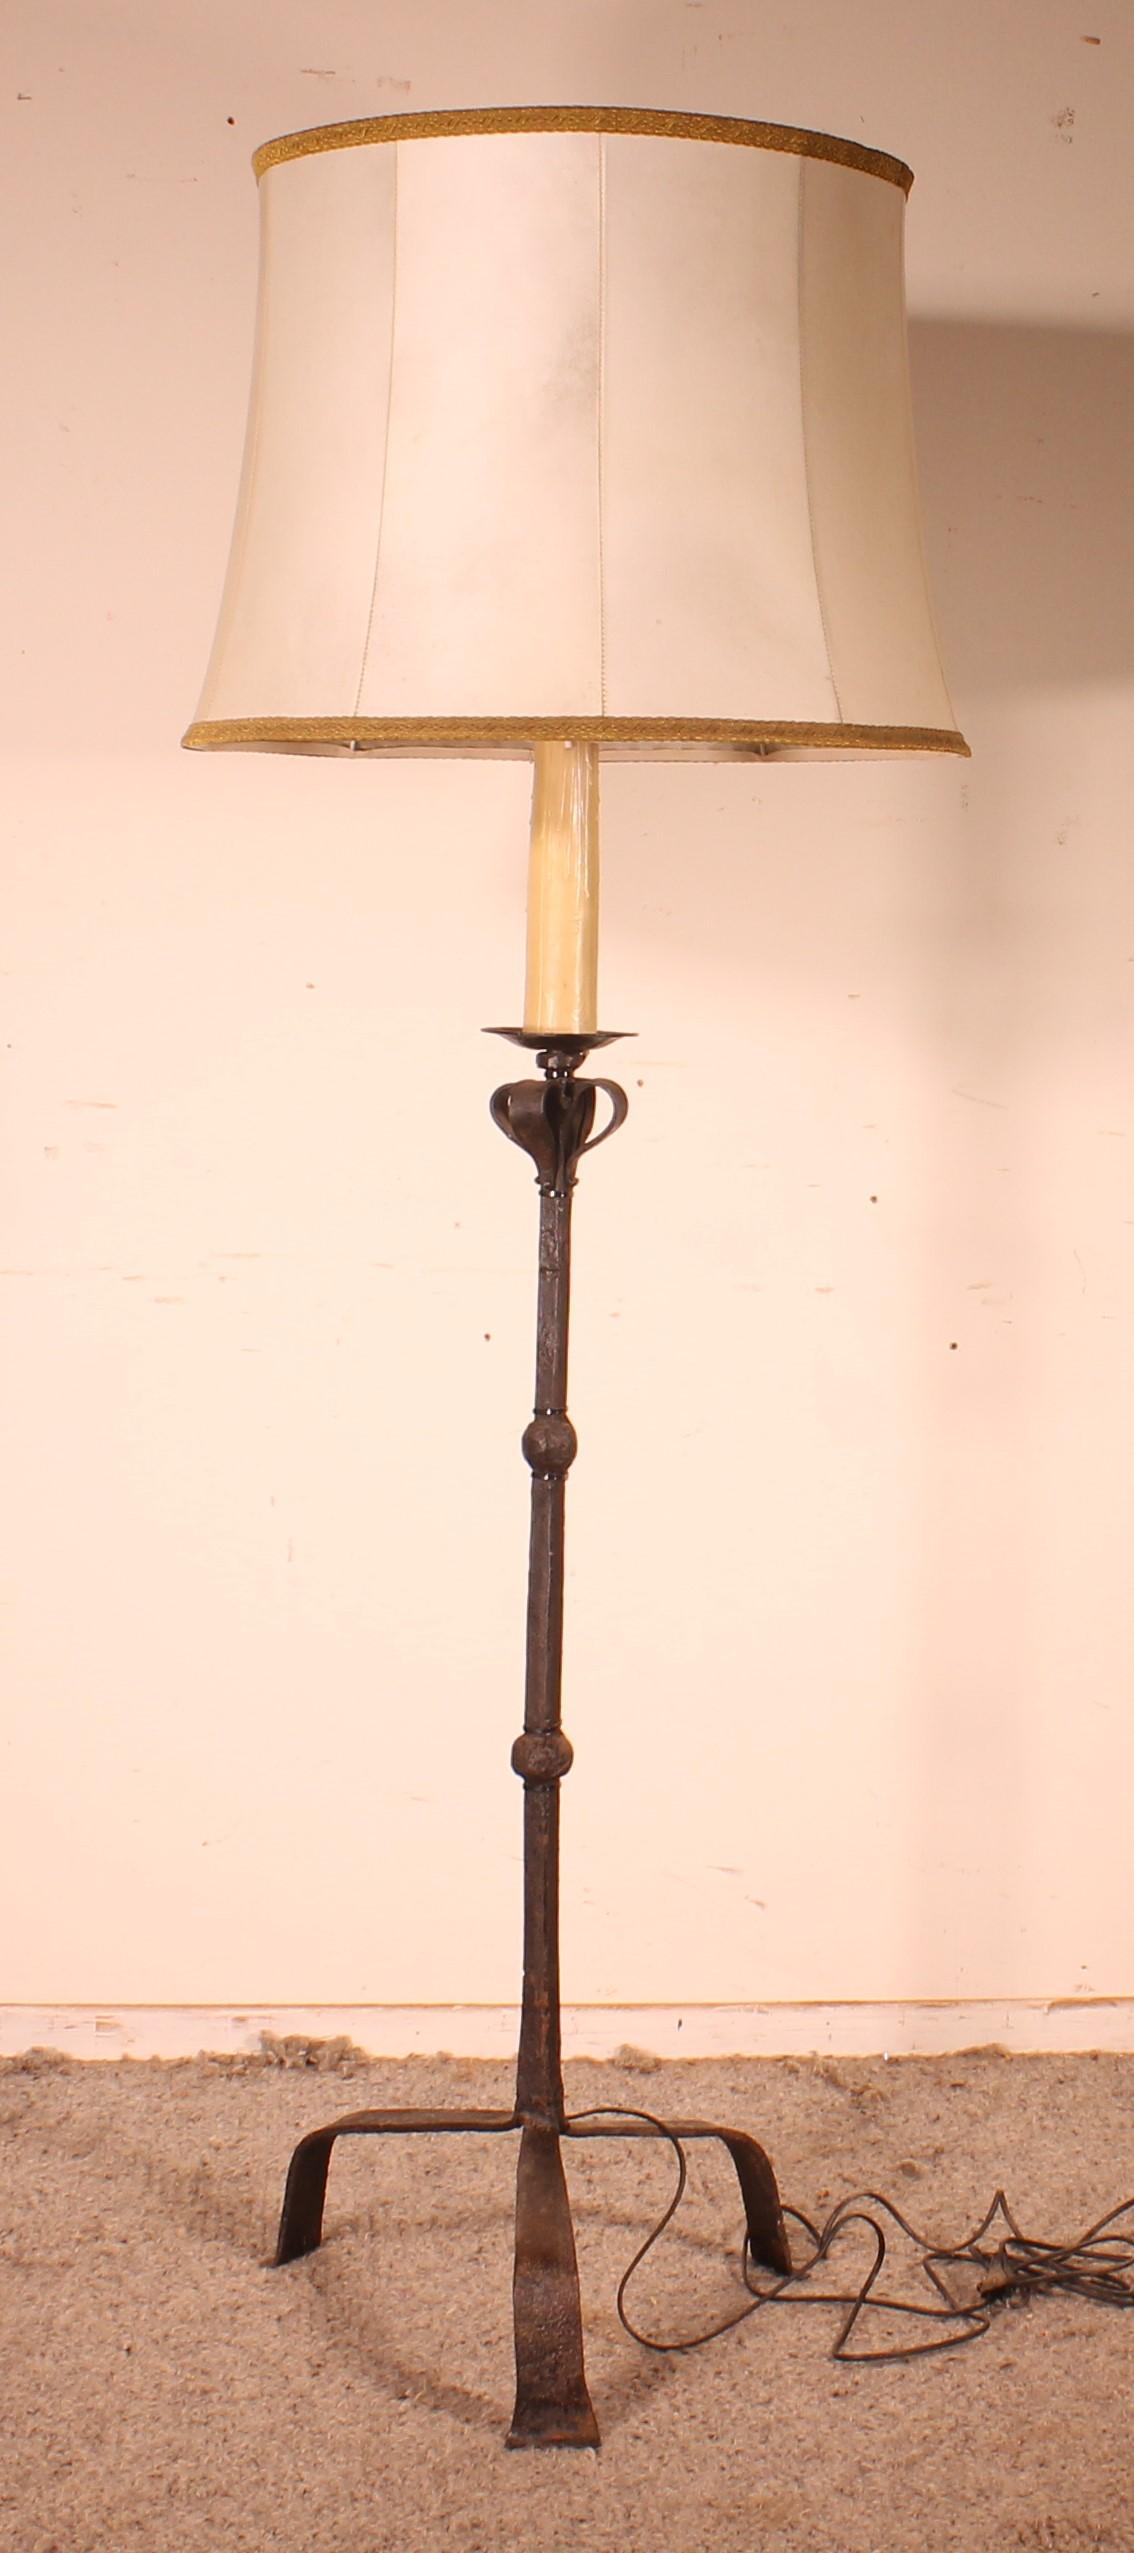 Superb 19th century wrought iron torchiere / floor lamp composed of 17th century elements
The floor lamp has been electrified and has a goatskin lampshade

Very beautiful model.